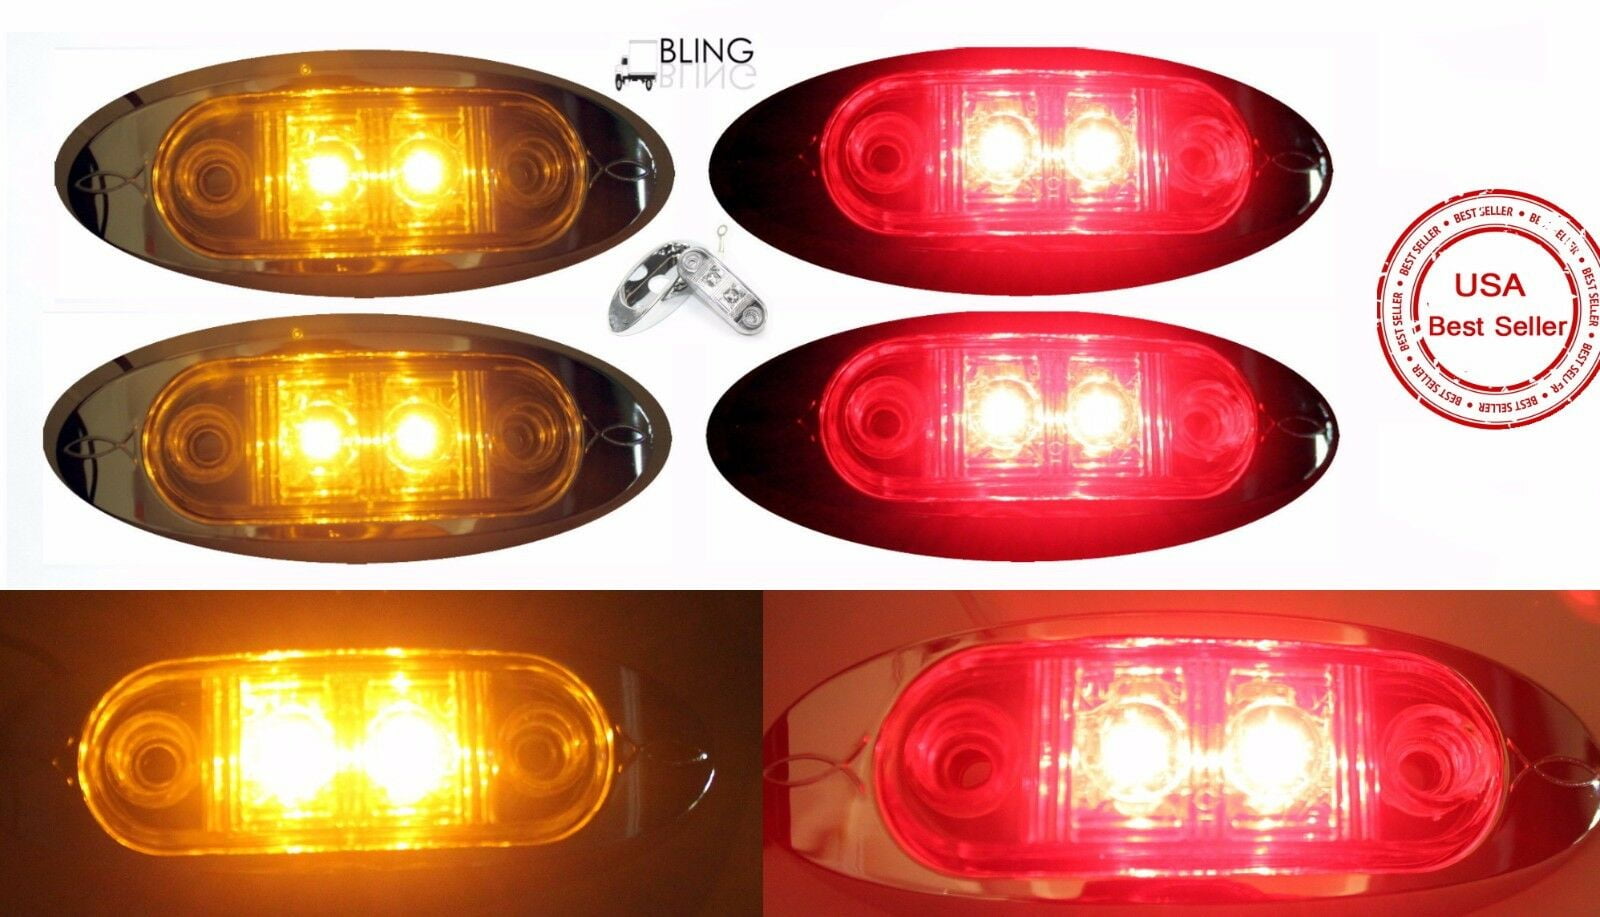 2x Amber 2x Red Clearance 2.5" 2-LED Oval Side Marker Lamp Light Truck Trailer